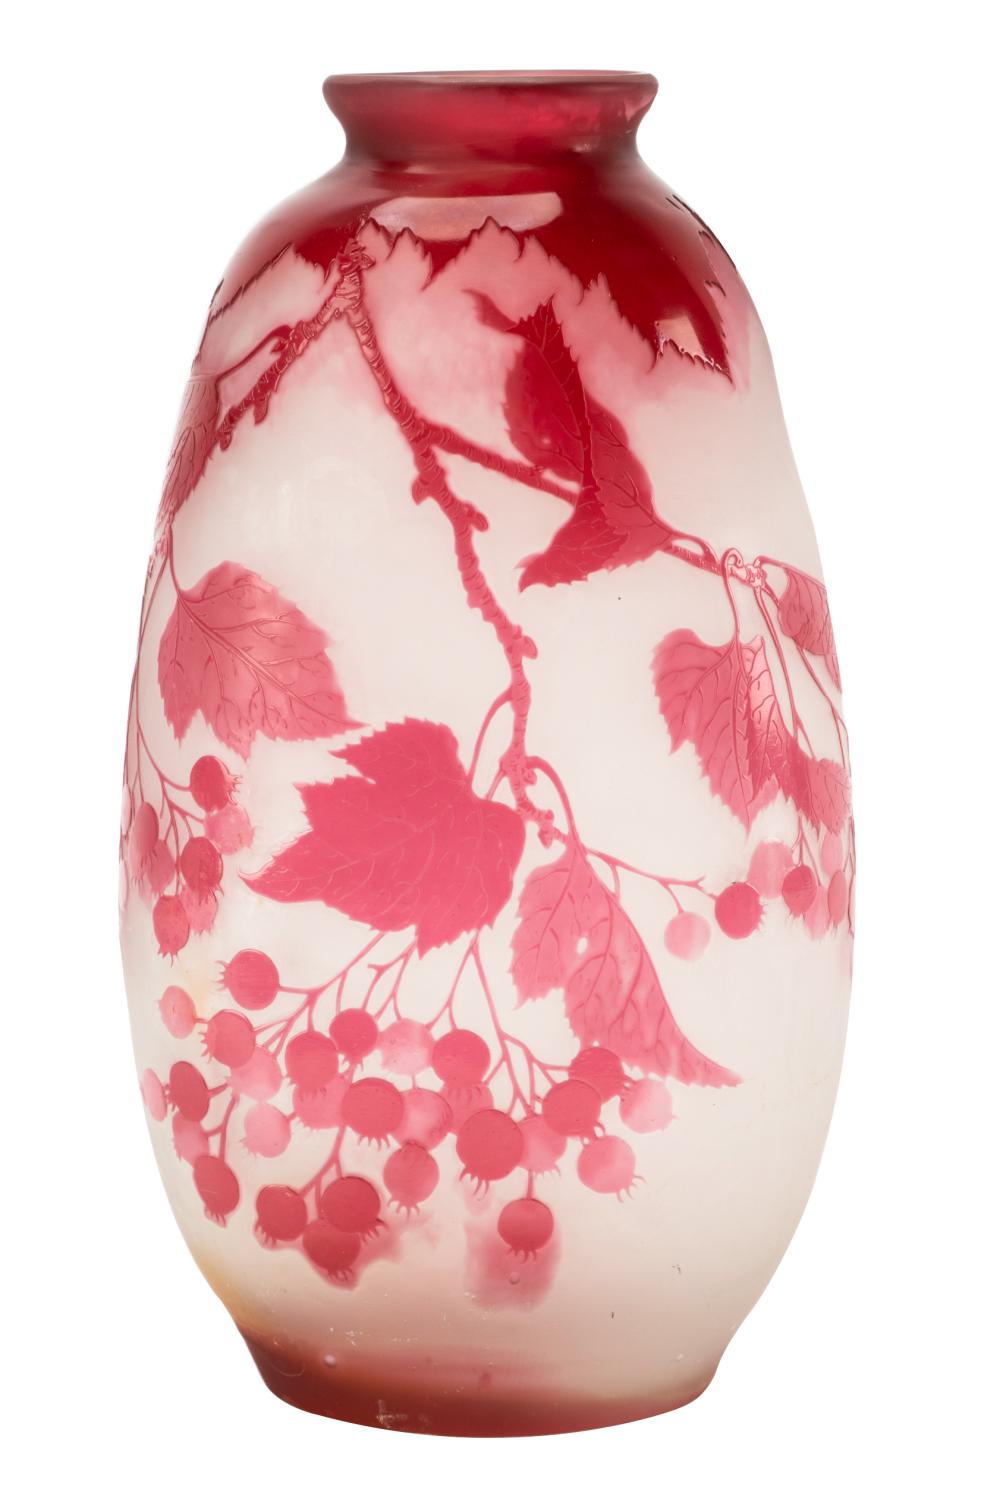 CAMEO GLASS VASEsigned Galle in cameo;